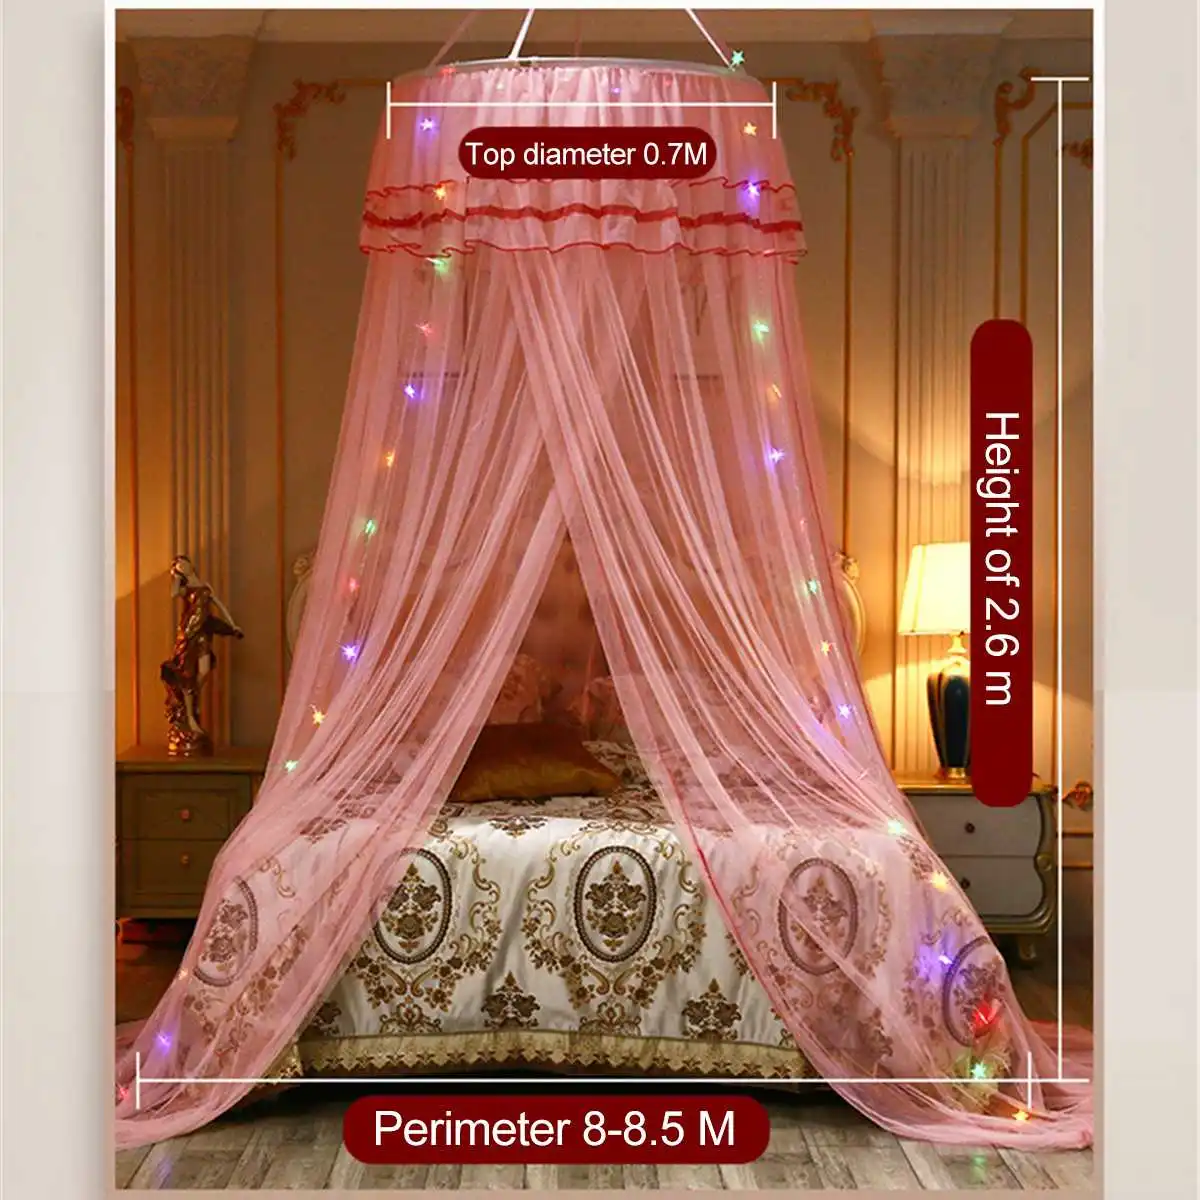 Bedding Decor Sweet Style Round Dome Mosquito Net Bedding Dome Tent